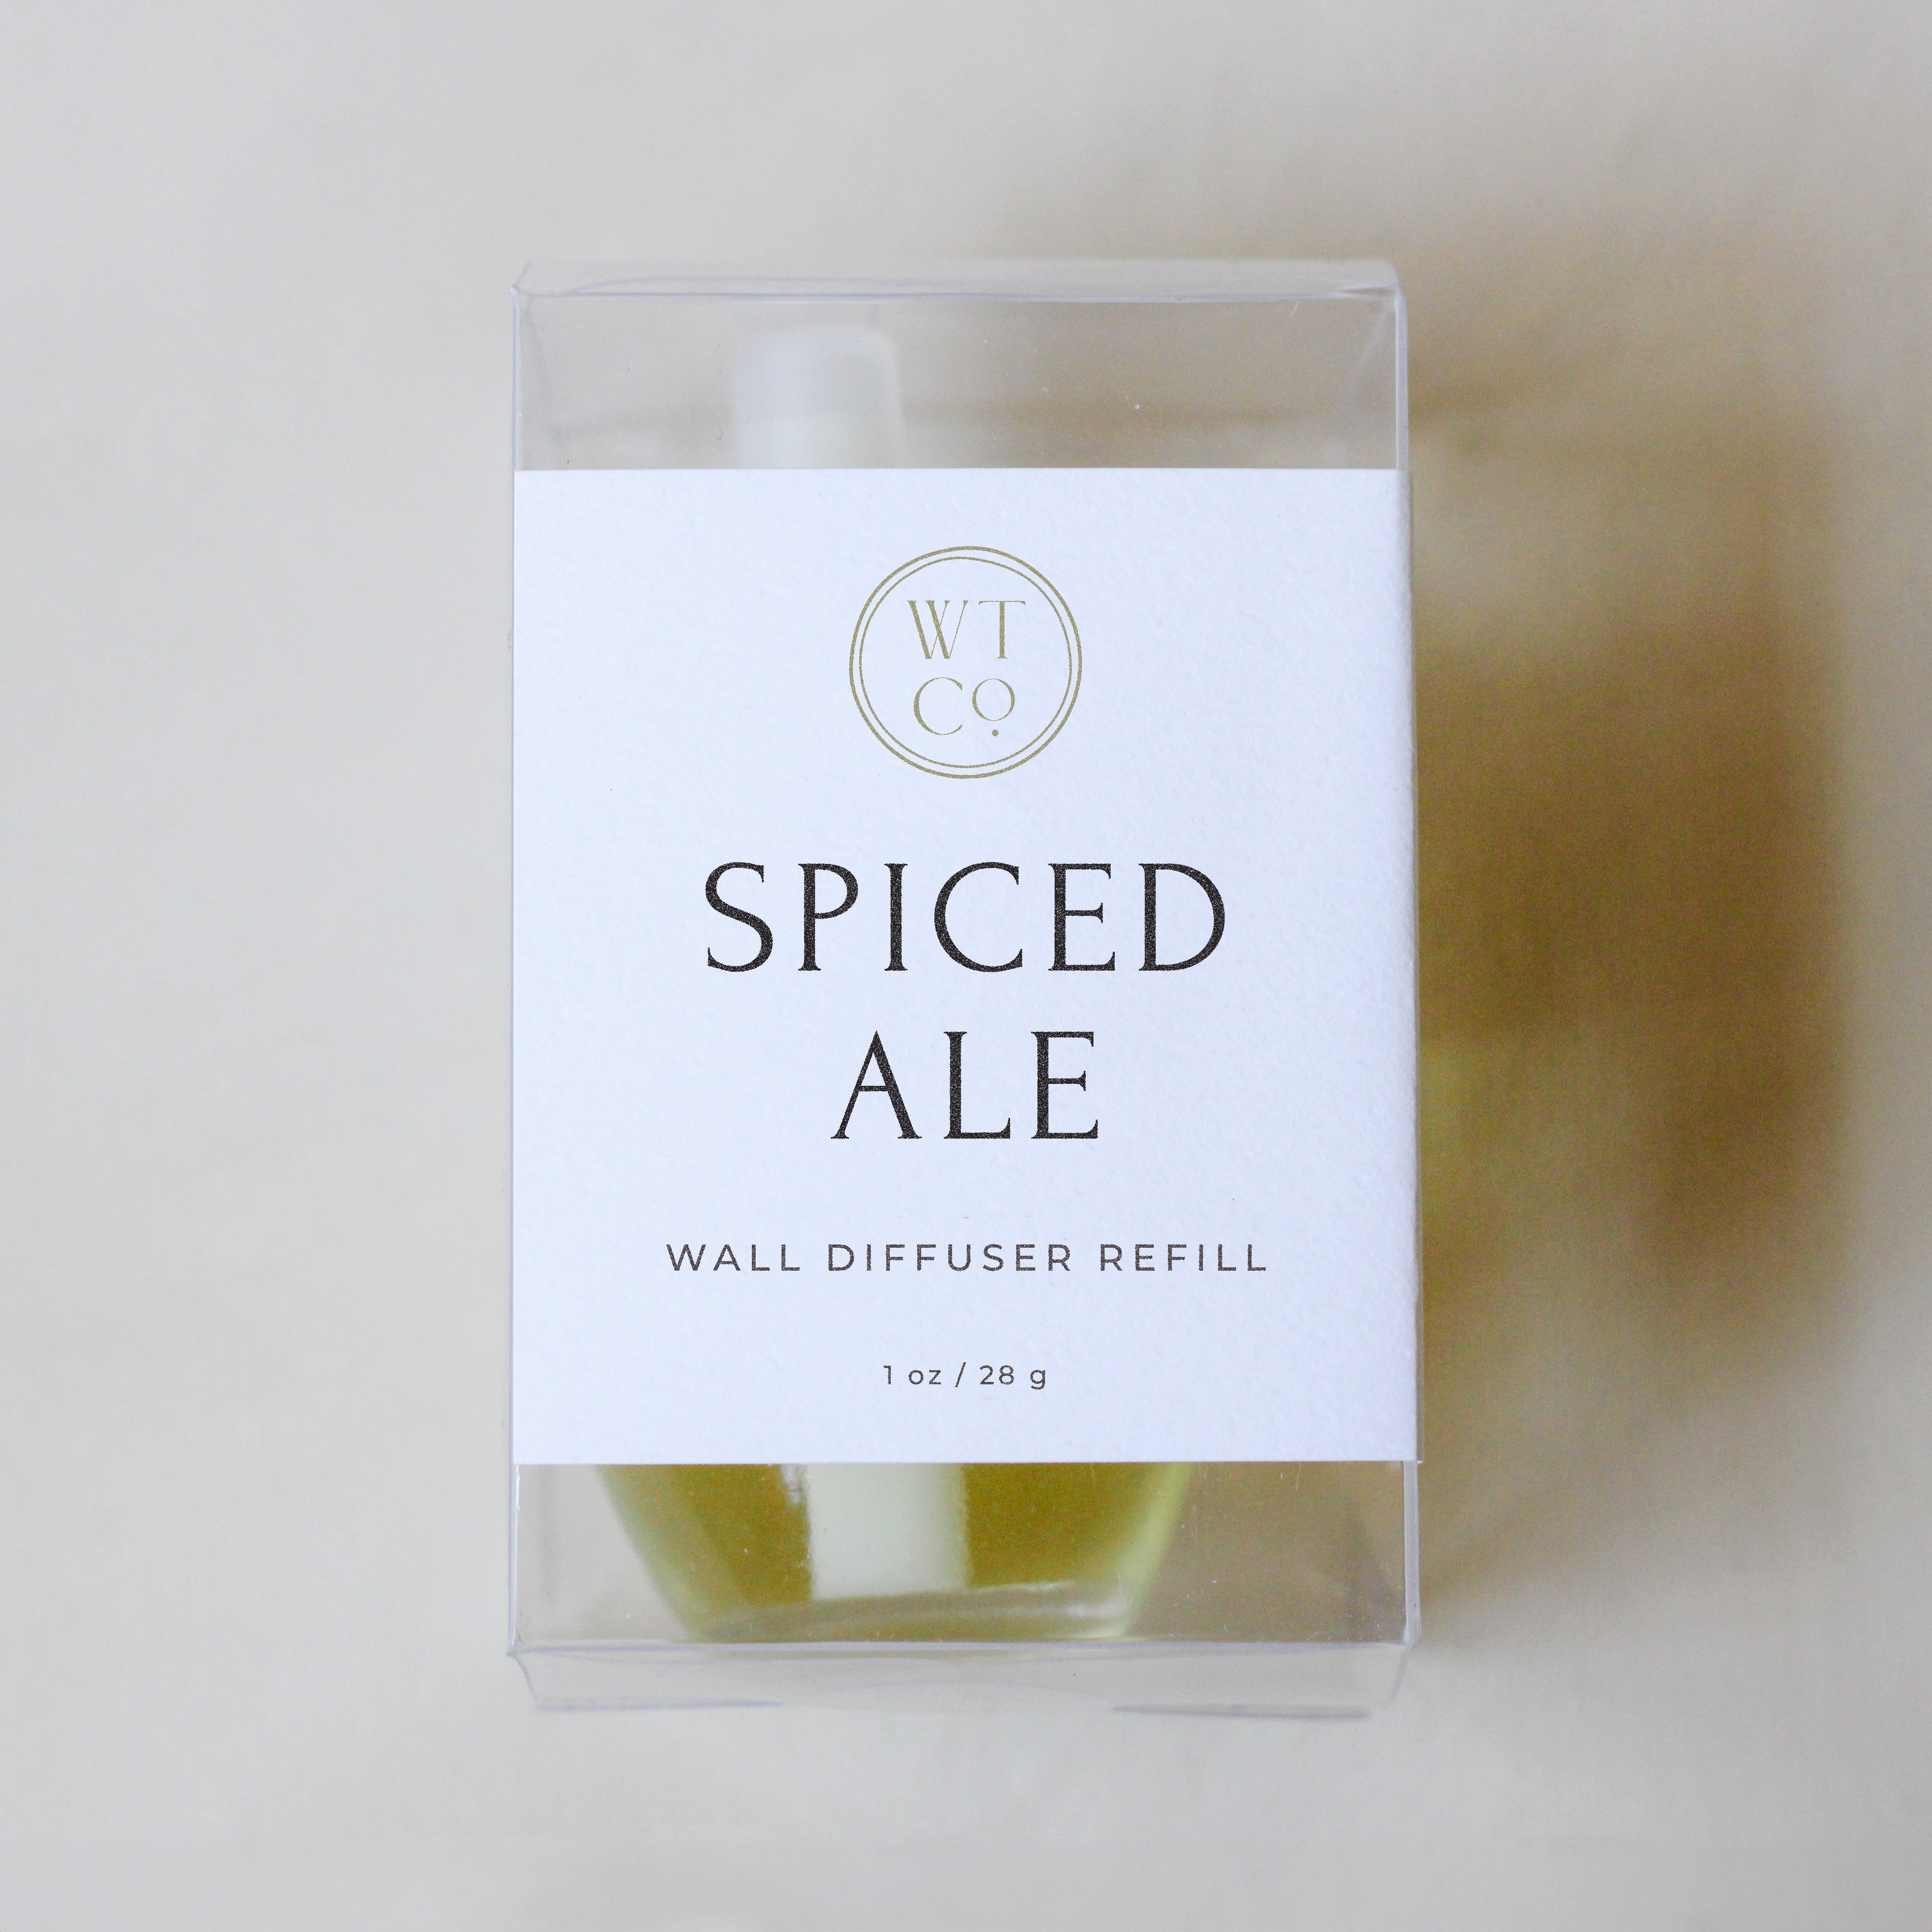 Spiced Ale Wall Diffuser Refill | Well-Taylored Co.